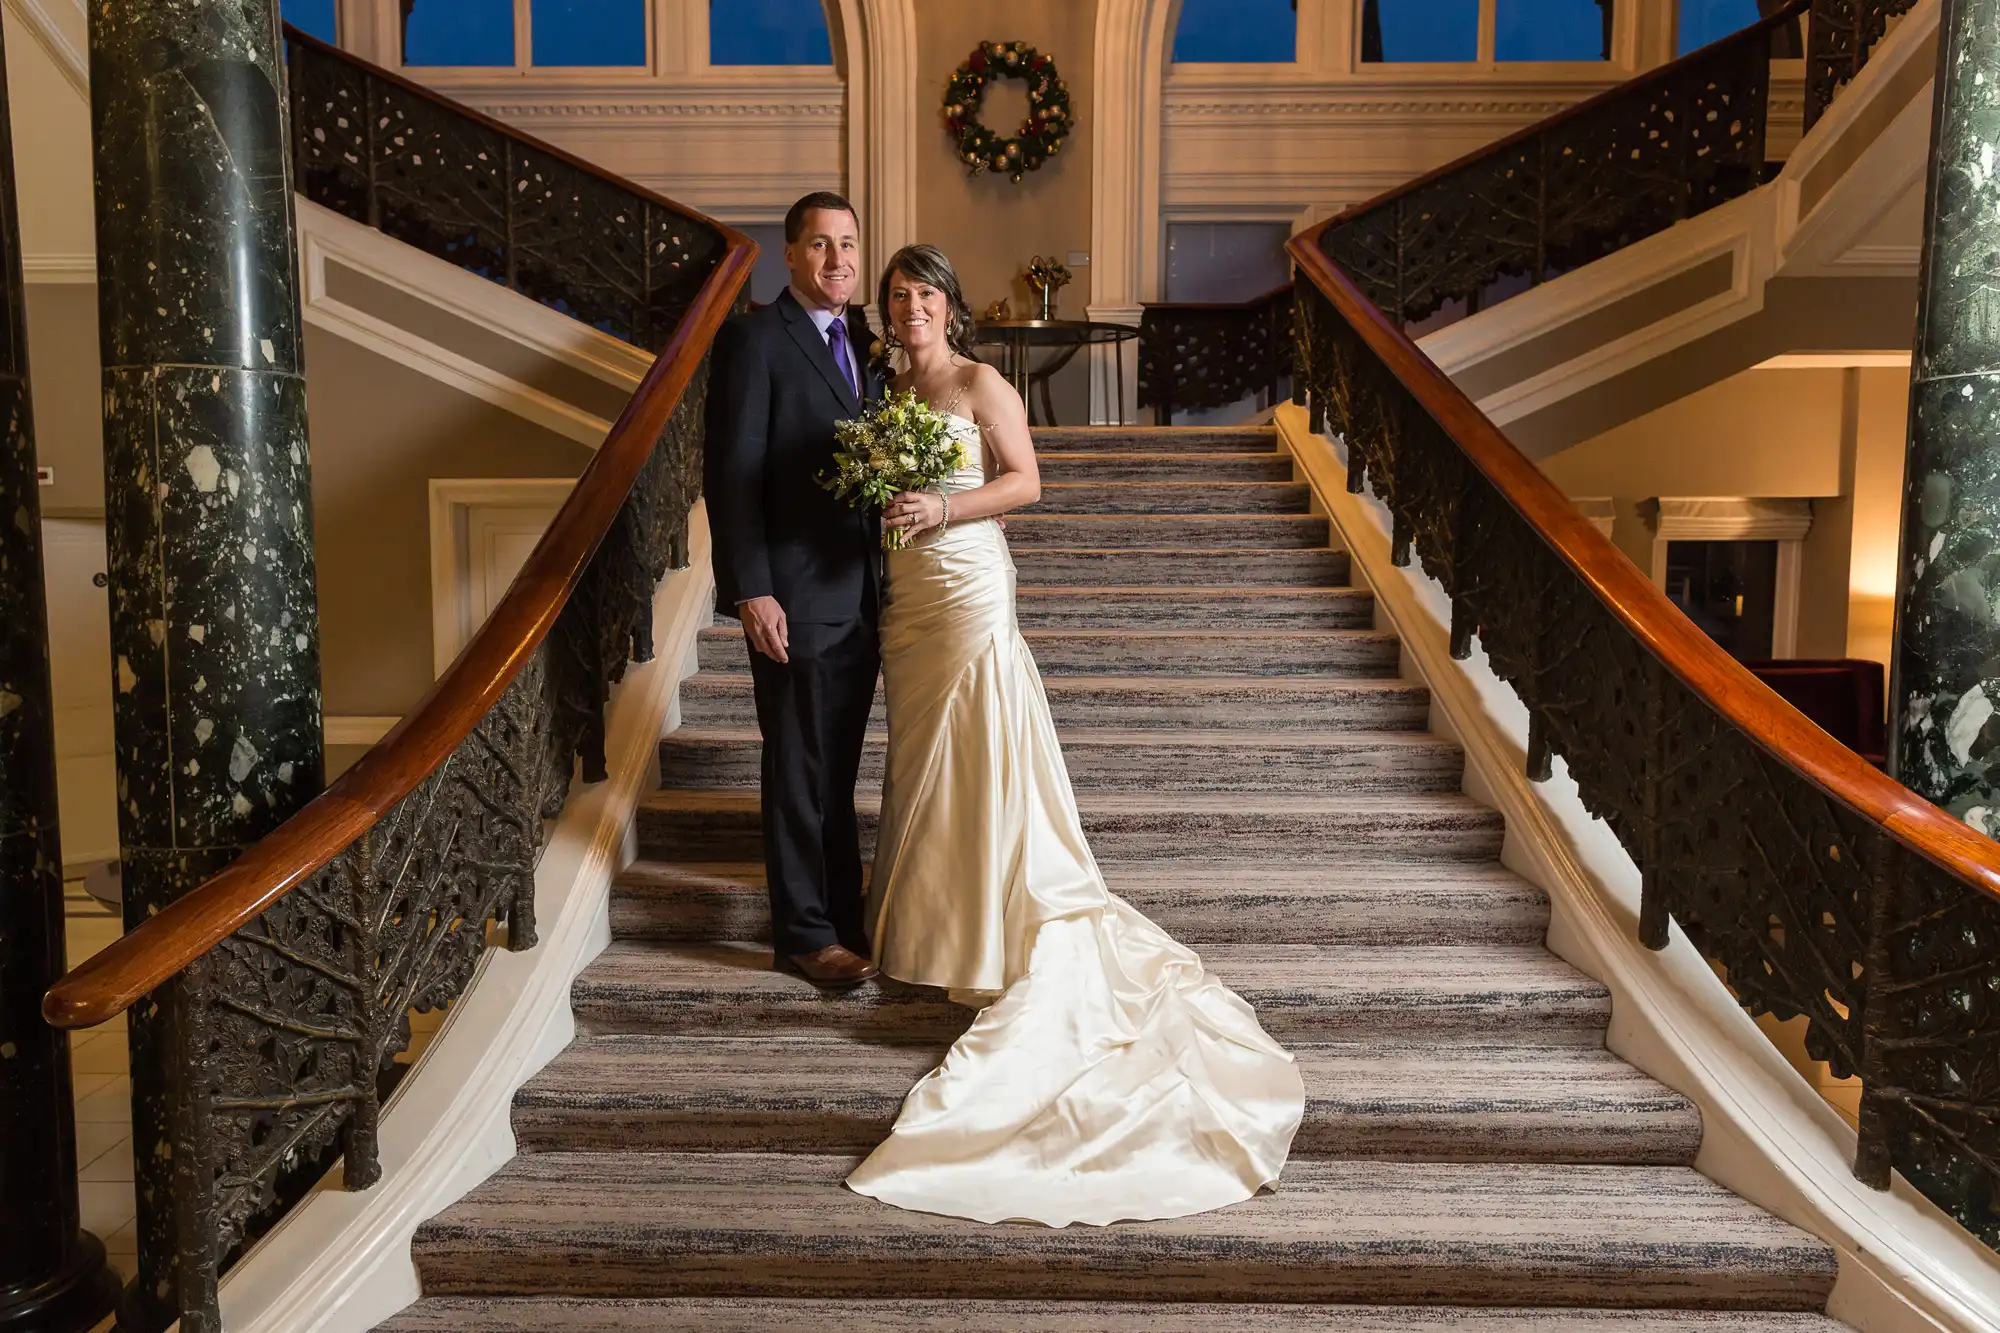 A bride and groom posing together on a grand staircase, the bride in a long cream dress and the groom in a dark suit.